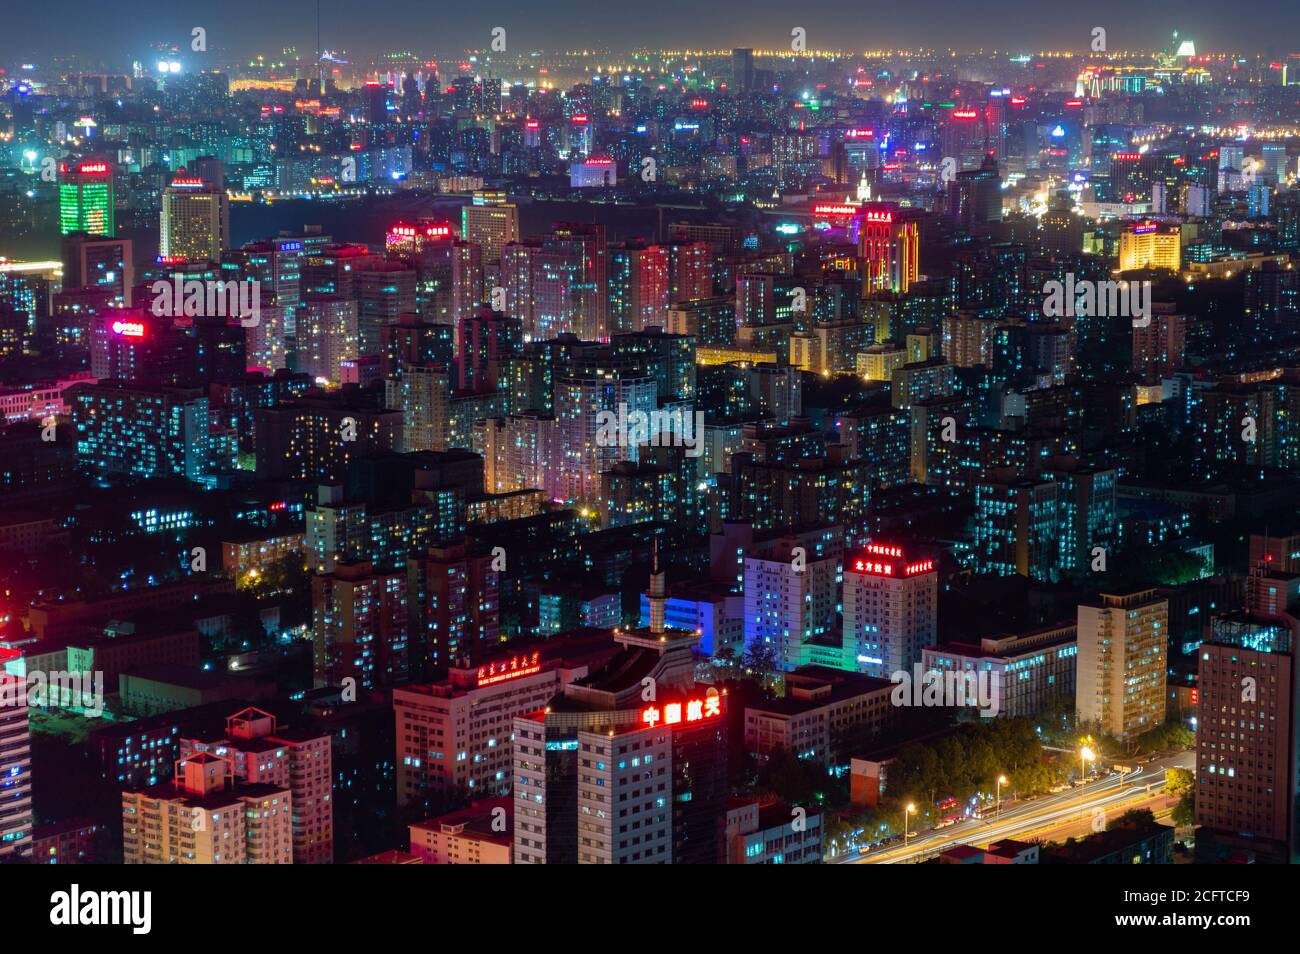 Beijing / China - August 25, 2014: Panoramic night view of Beijing cityscape, view from Central Television Tower observation platform Stock Photo